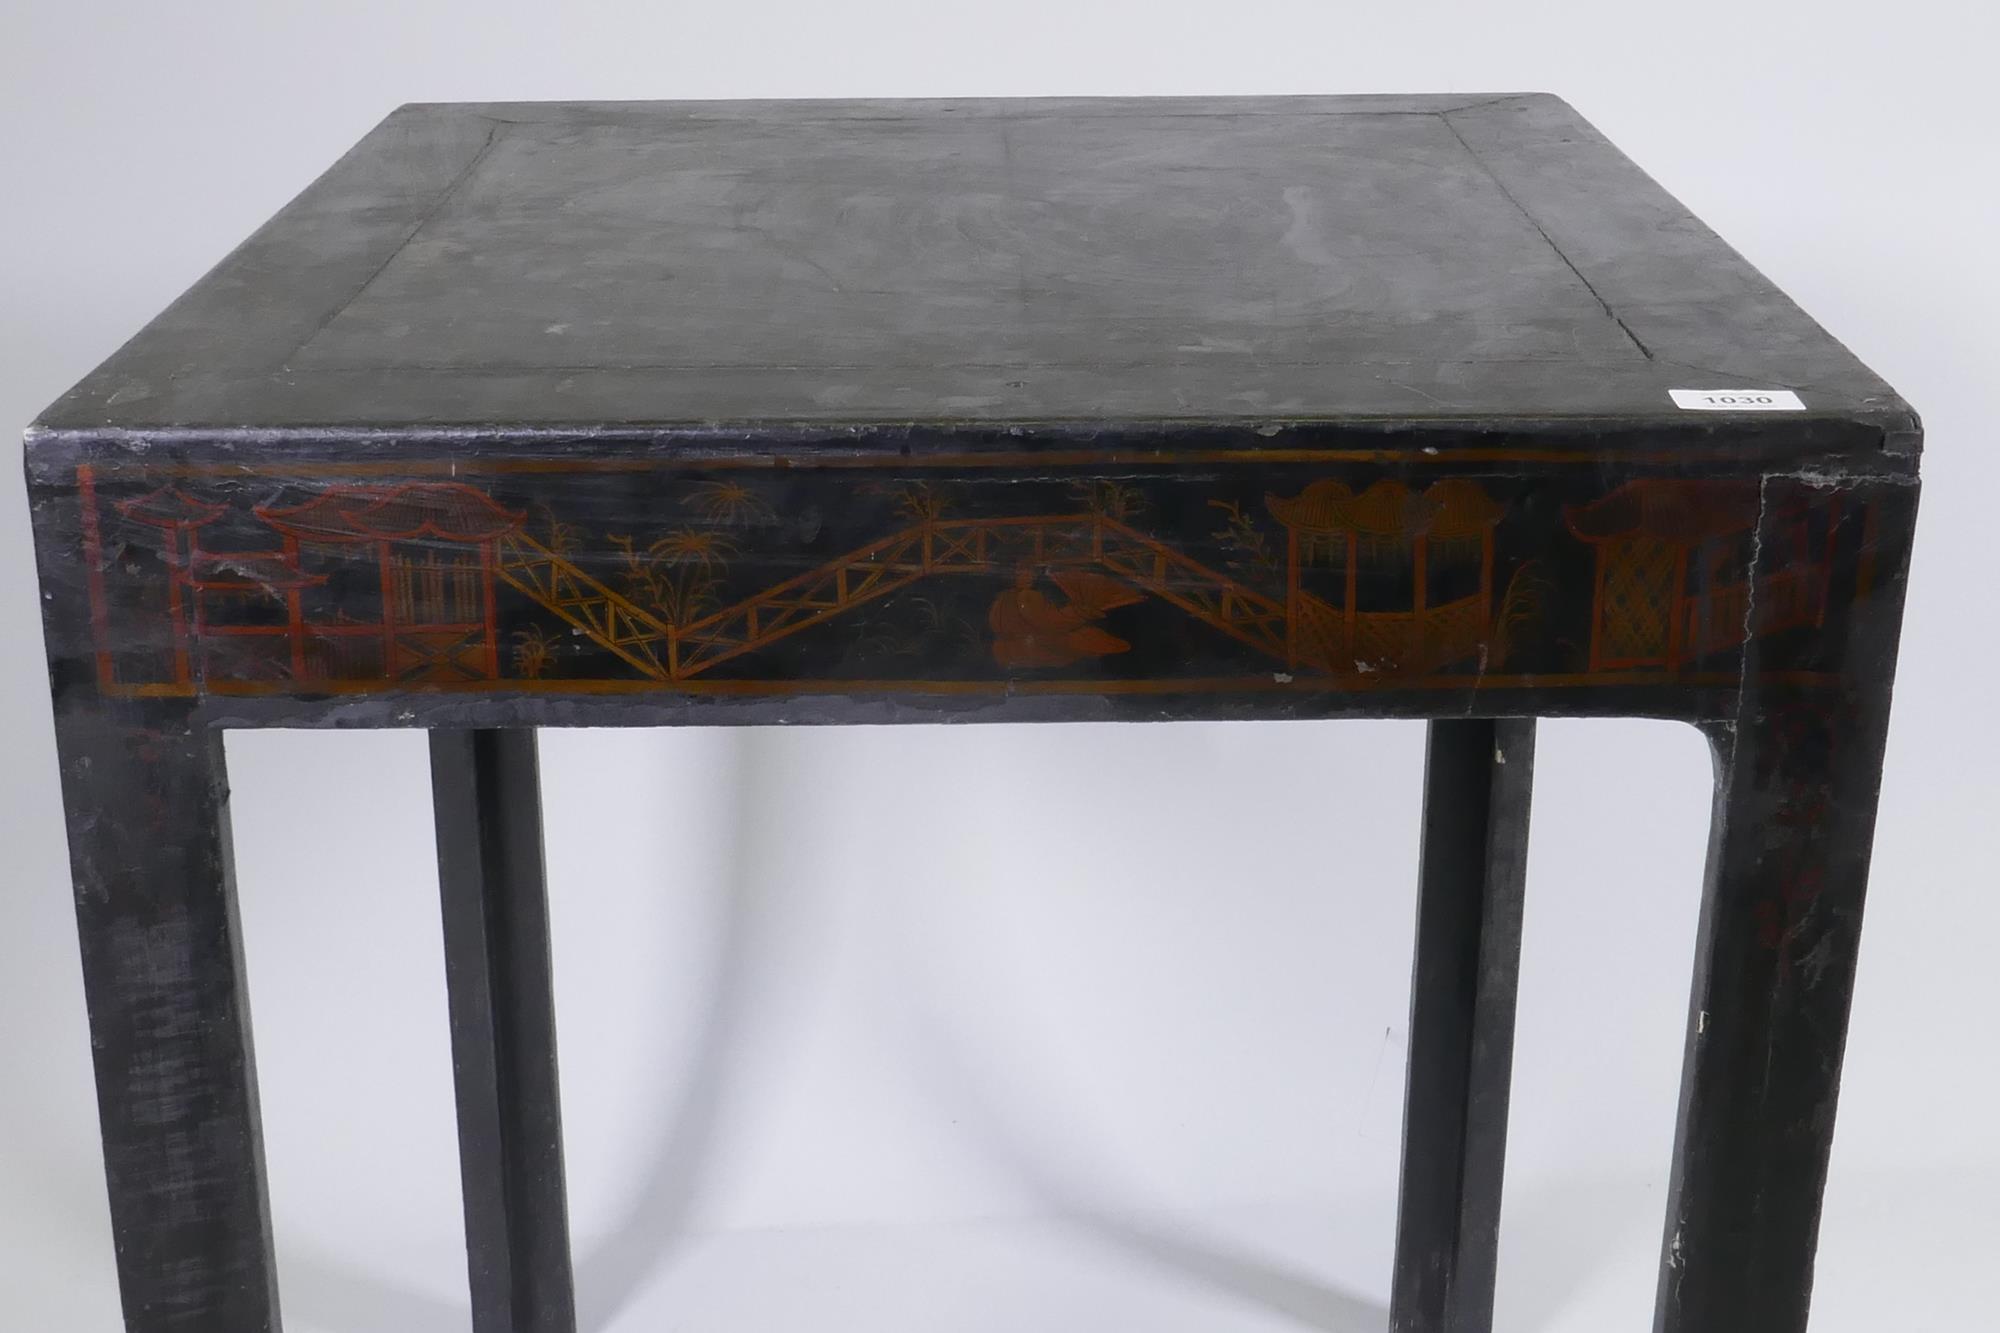 An antique black lacquer chinoiserie table, 63 x 63cm, 70cm high - Image 3 of 4